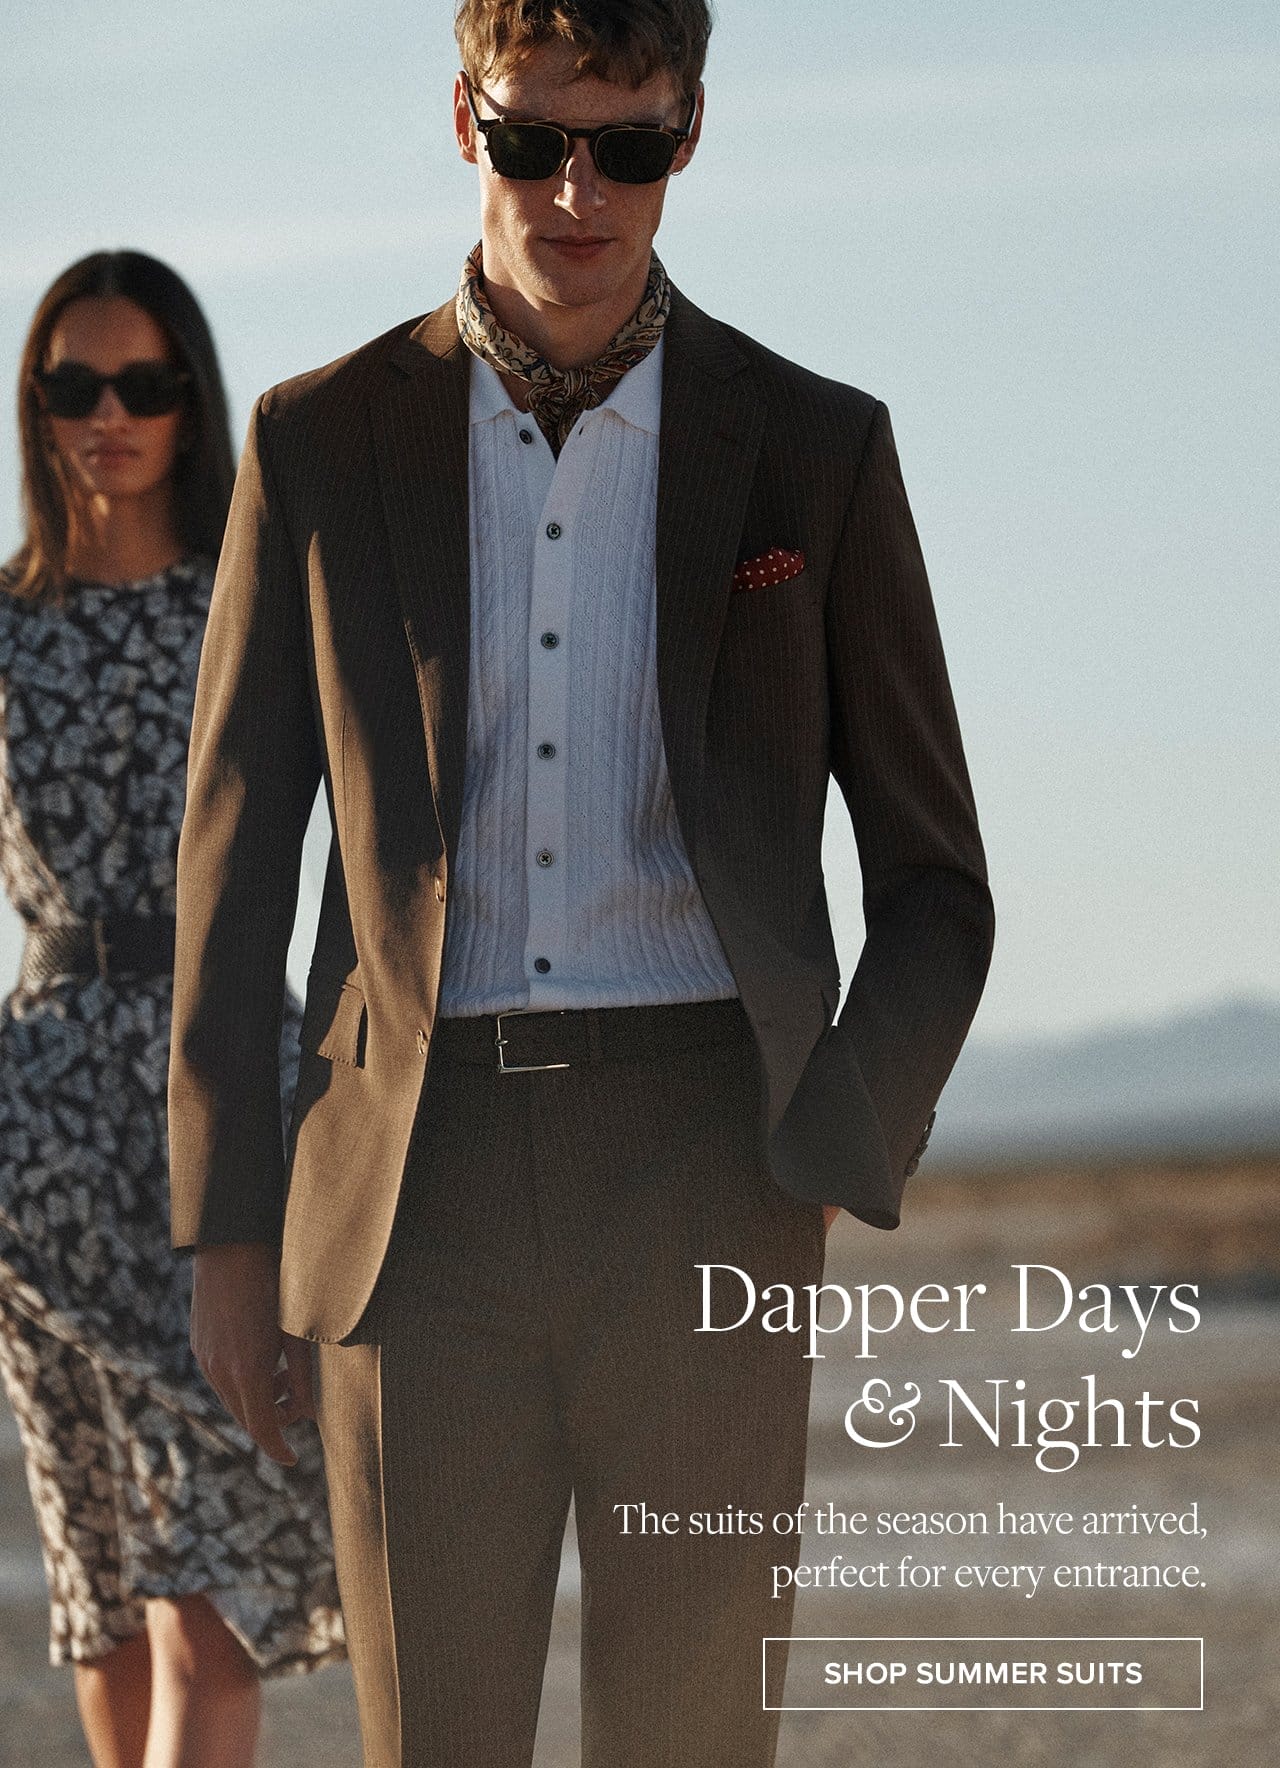 Dapper Days and Night The suits of the season have arrived, perfect for every entrance. Shop Summer Suits